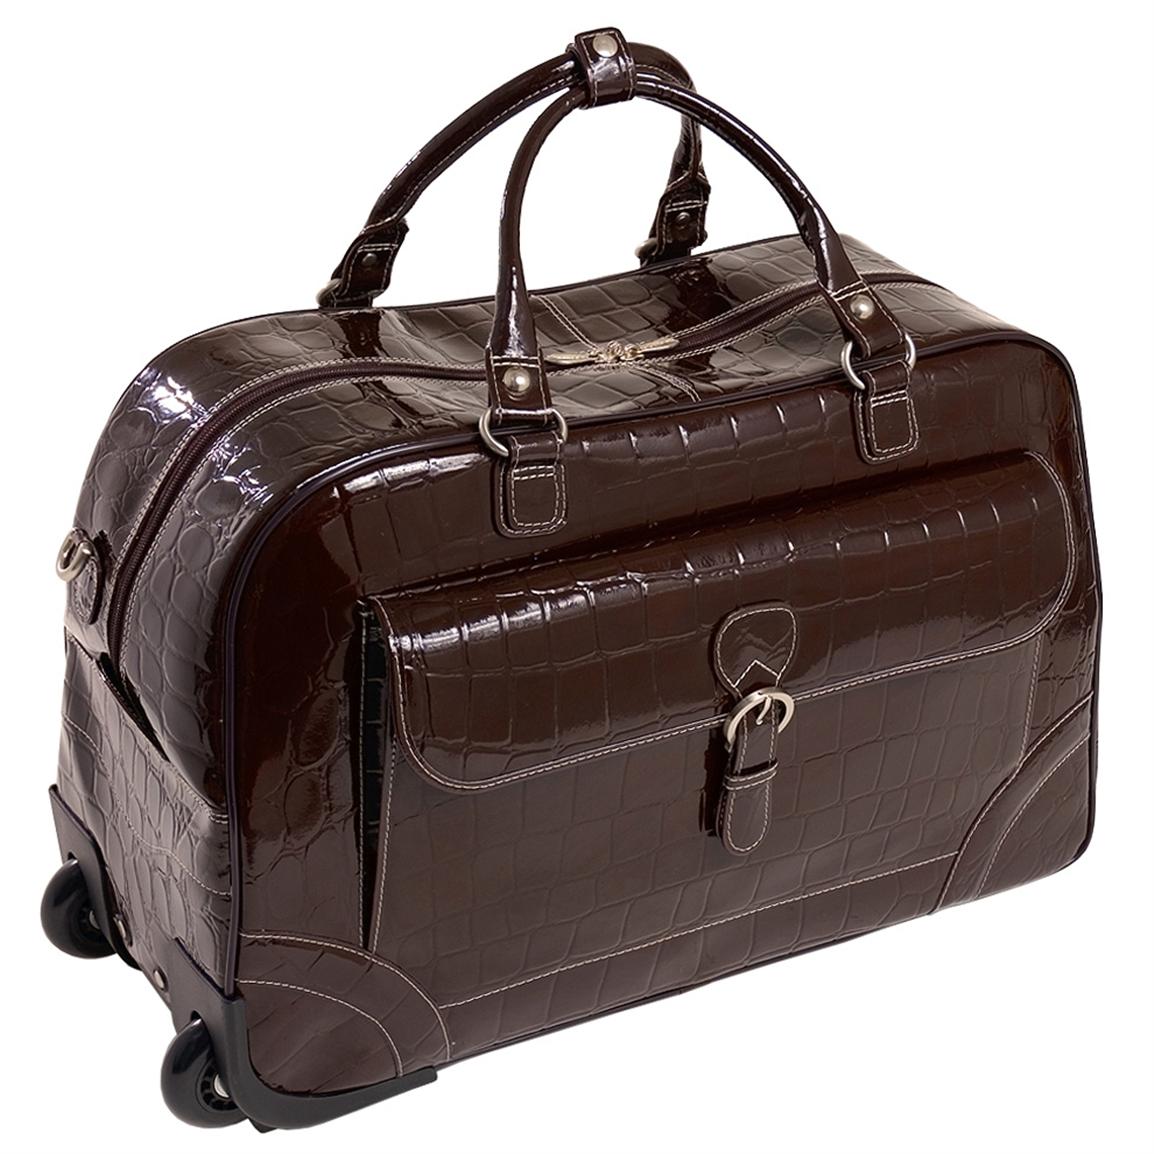 Leather Duffle Bag On Wheels | Literacy Ontario Central South